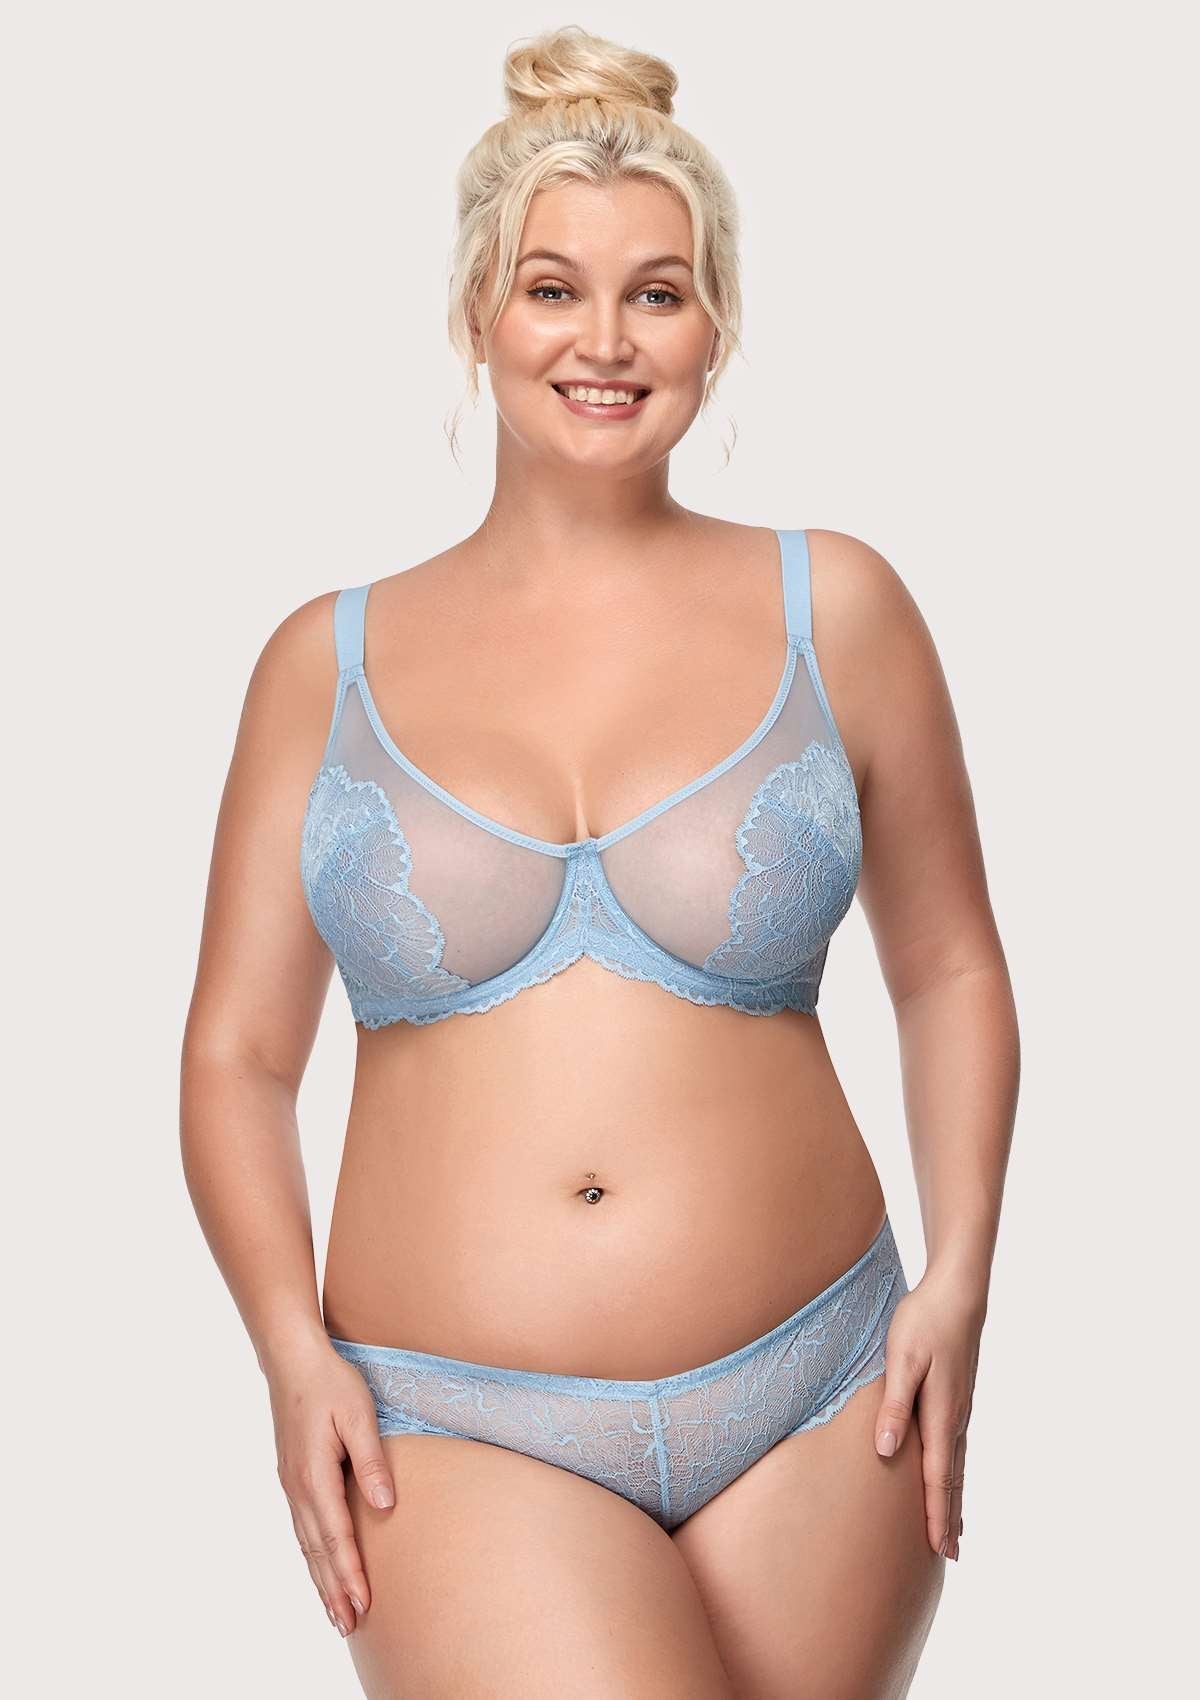 HSIA Blossom Full Coverage Supportive Unlined Underwire Bra Set - Storm Blue / 34 / DDD/F